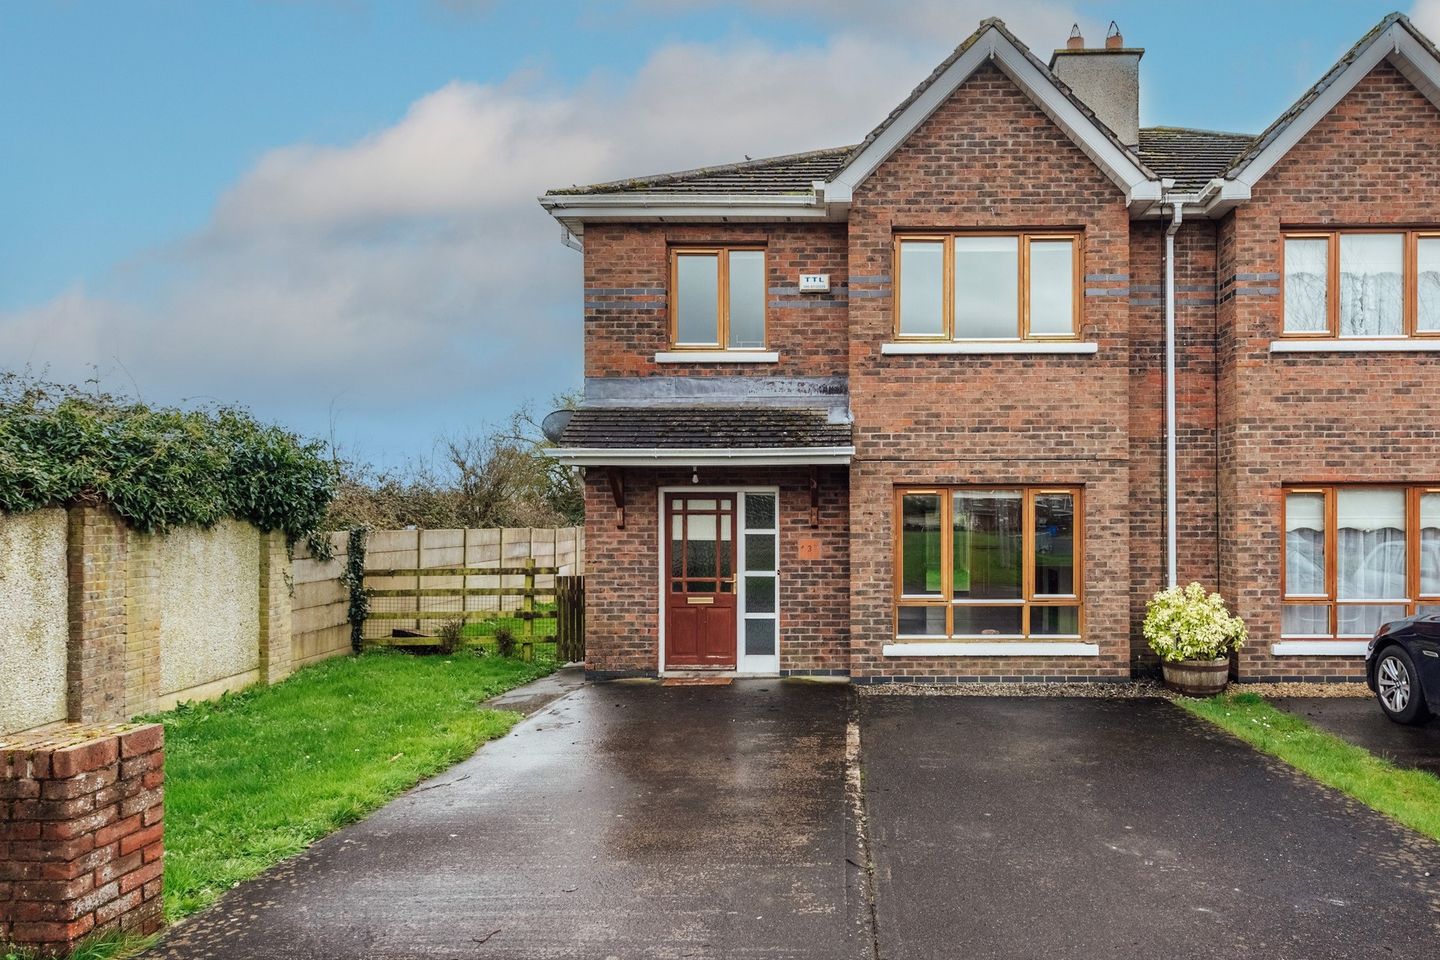 137 Branswood, Athy, Co. Kildare, R14F651